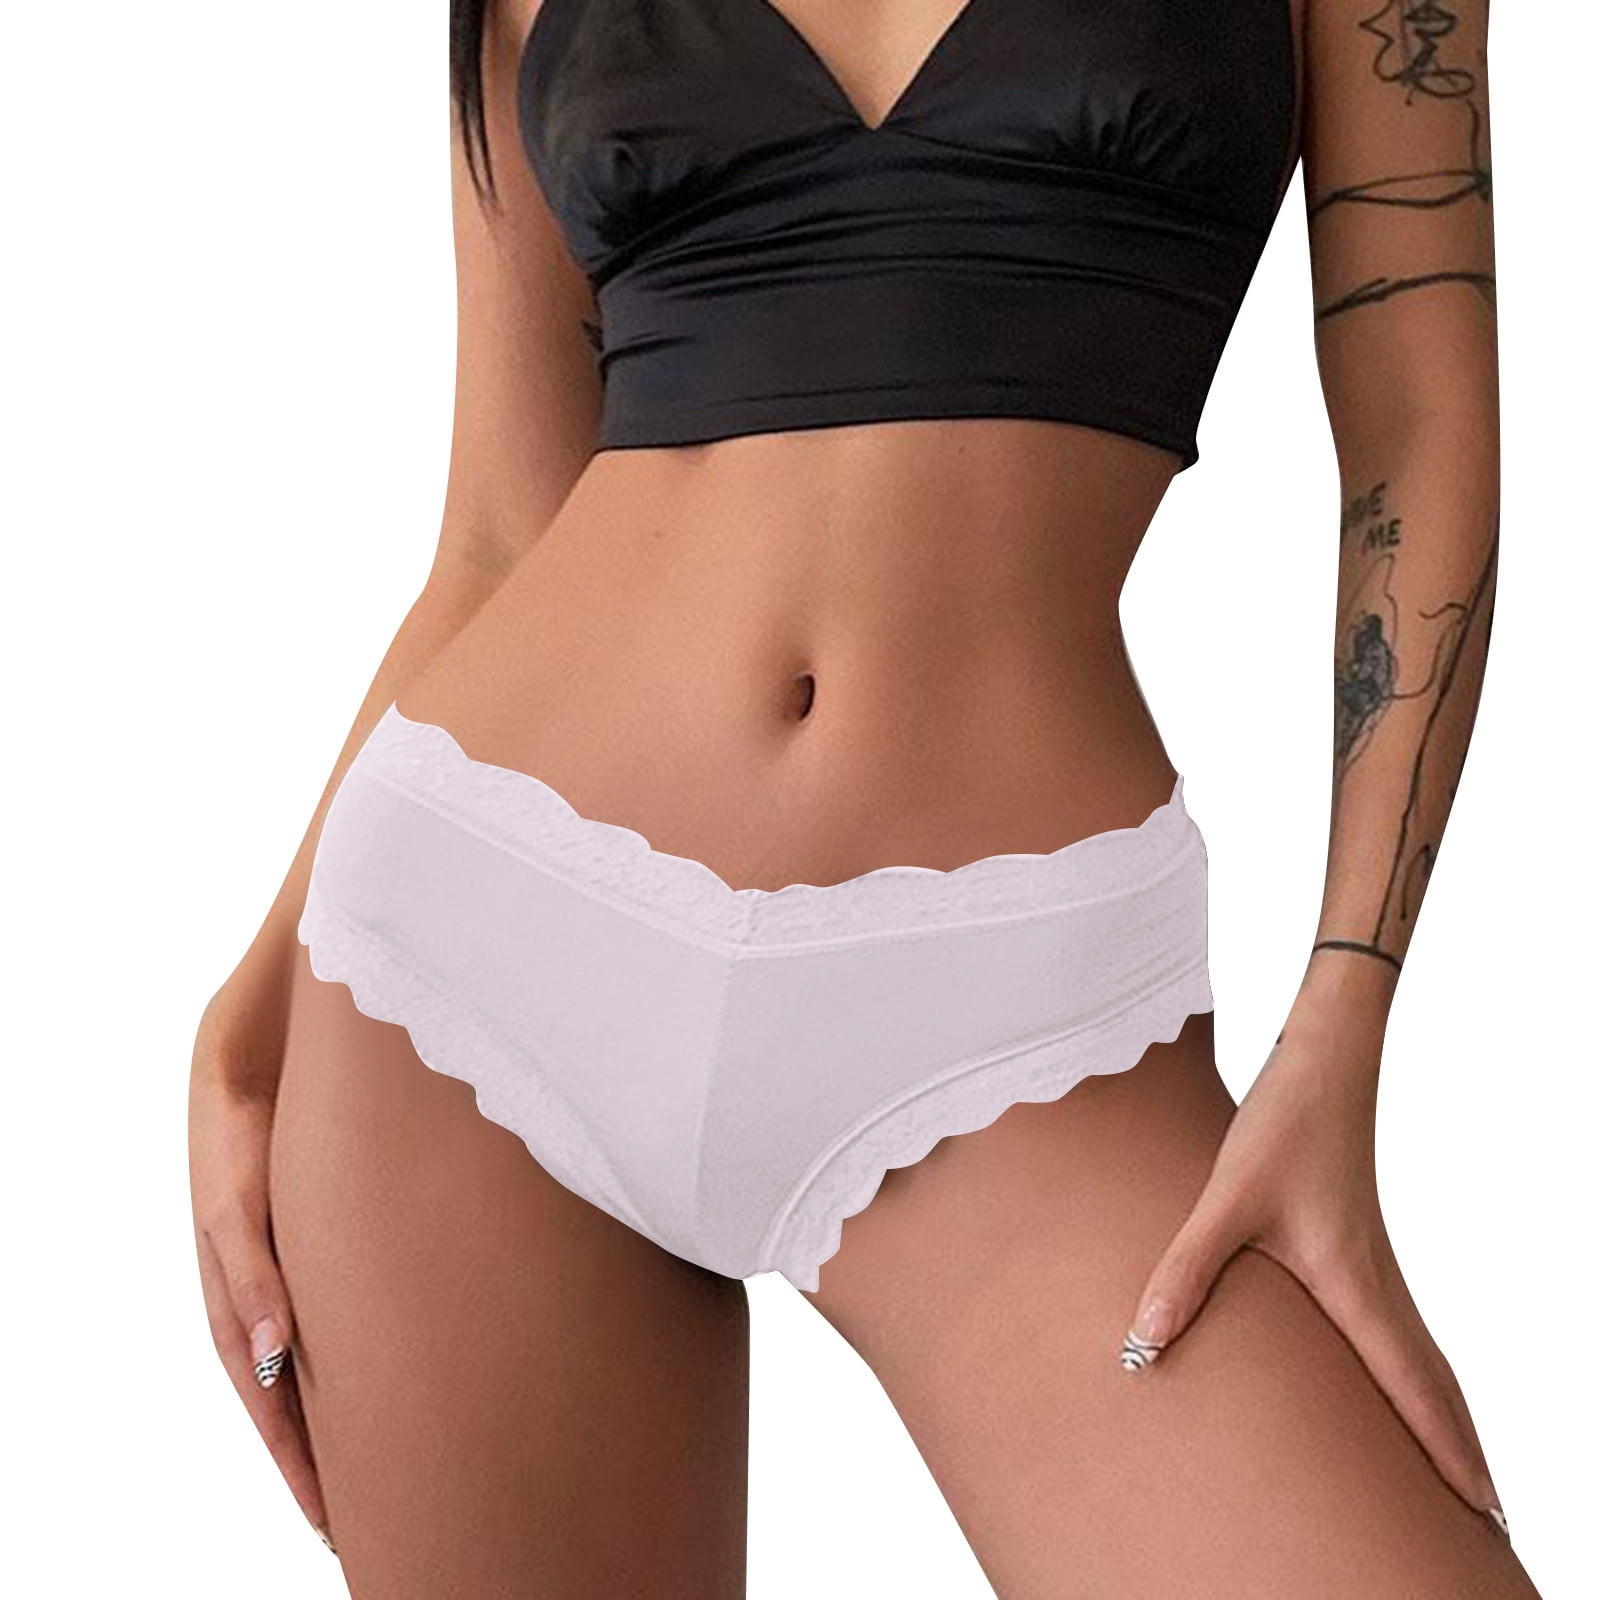 TAIAOJING Seamless Thong For Women Floral Lace Mesh Panties Low